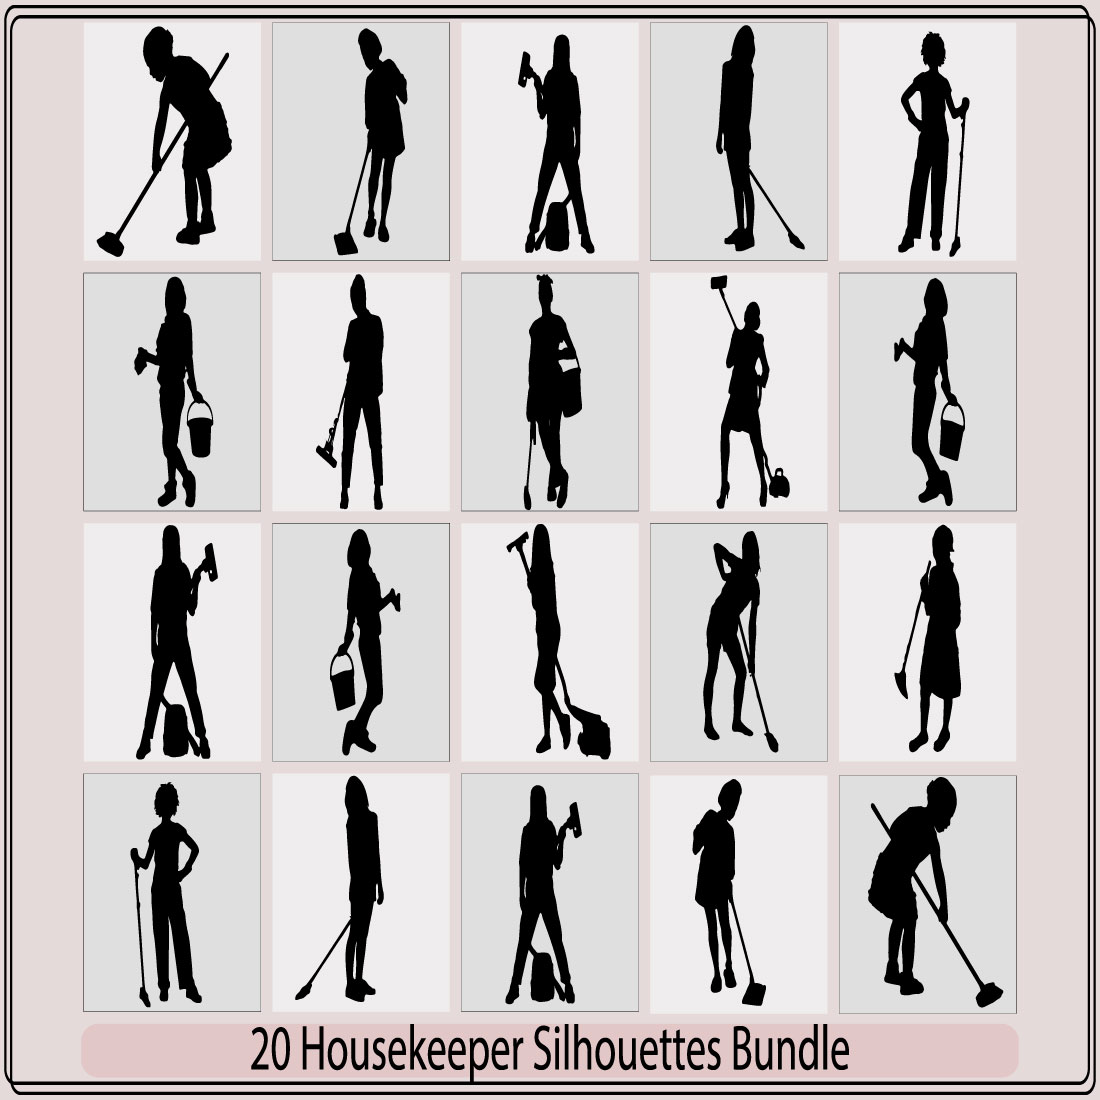 Silhouette of female cleaner,cleaning maid silhouette vector illustration Housemaid,Maid Silhouette, Woman Housekeeper, House Cleaning Service illustration Vector cover image.